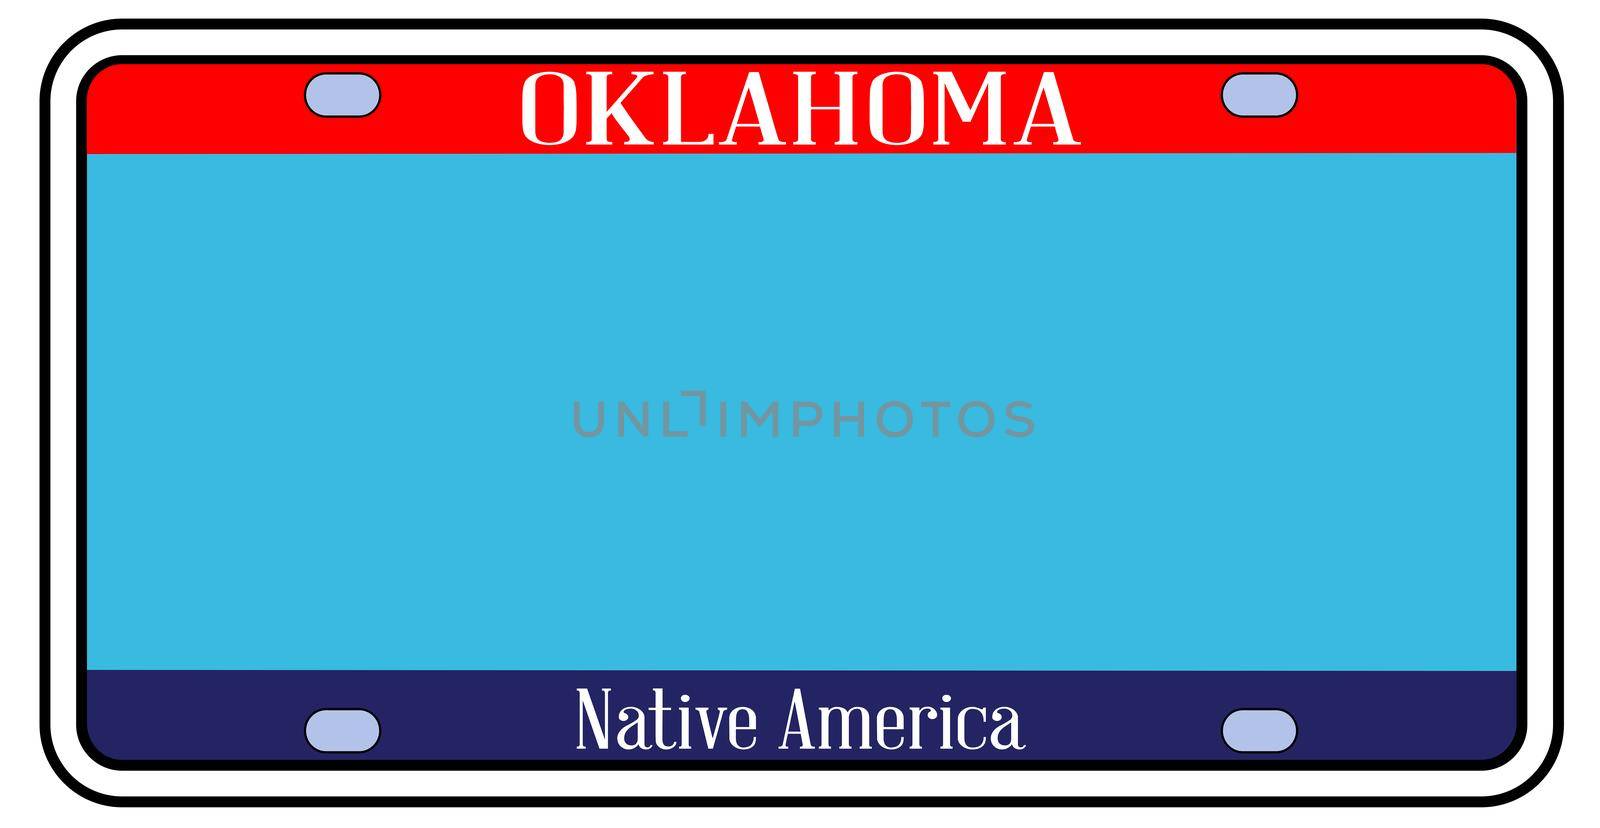 Blank Oklahoma state license plate in the colors of the state flag over a white background